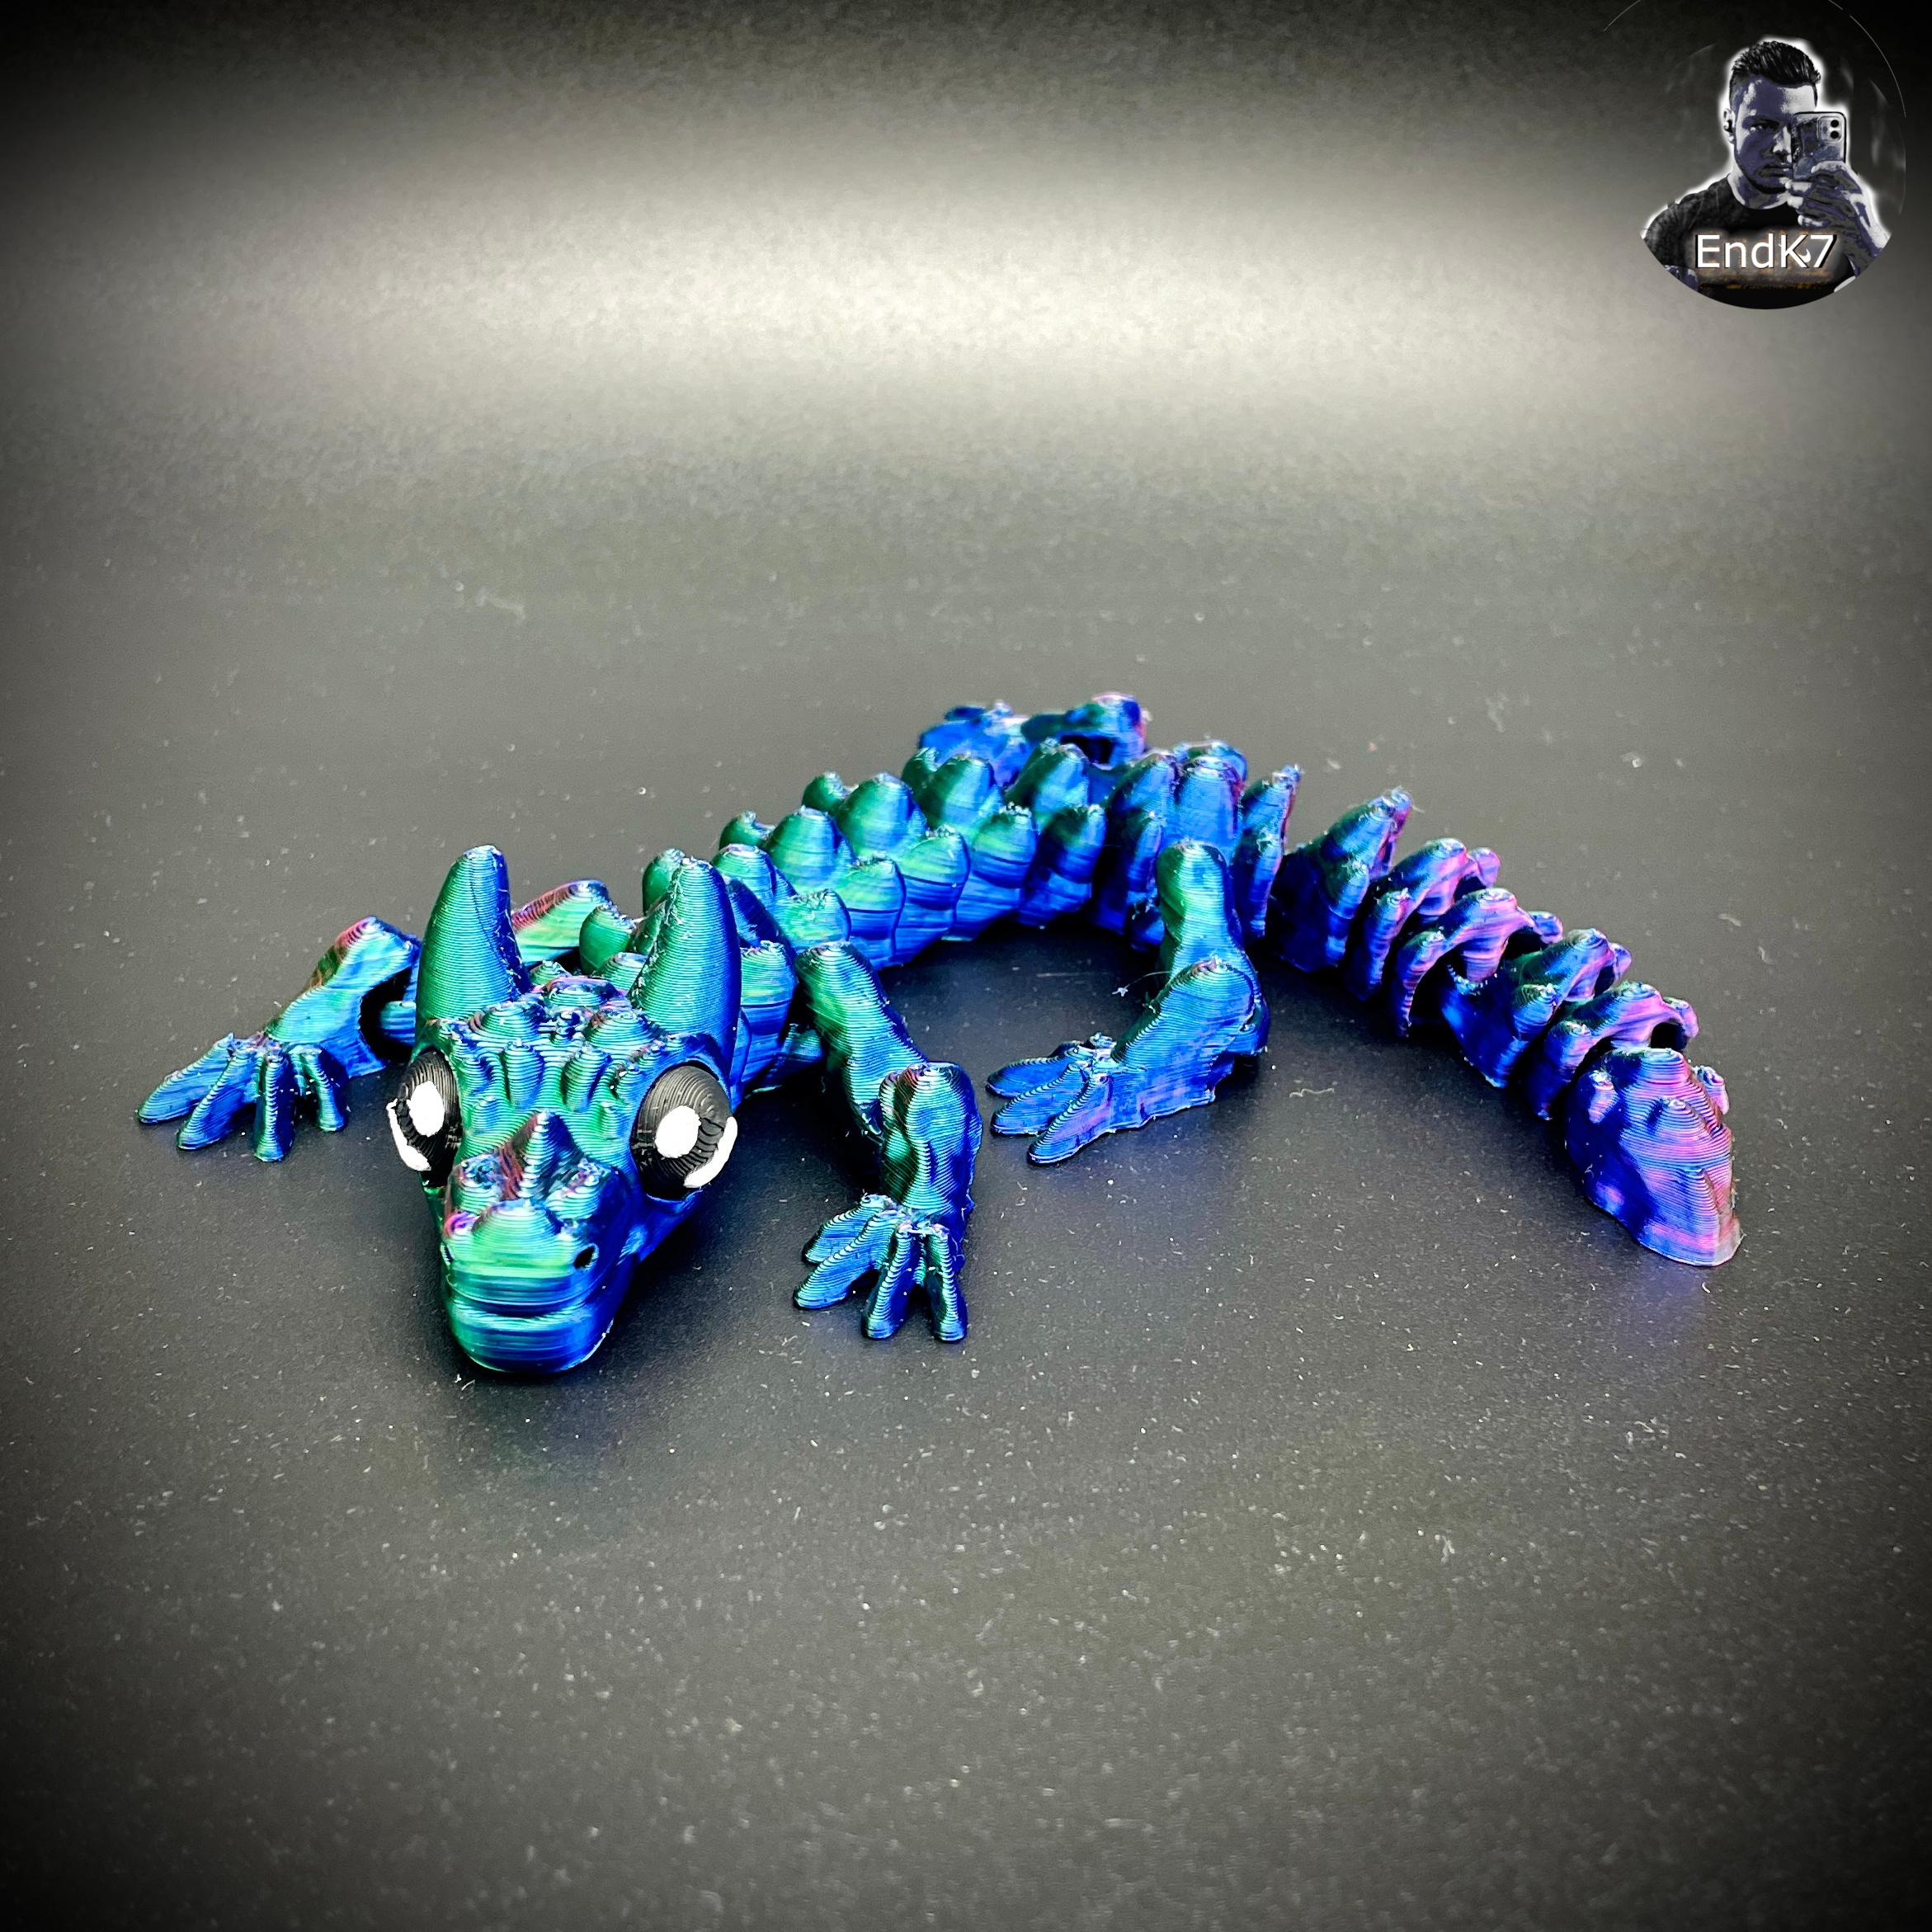 Baby Bull Dragon - Flexi - Print in Place - No Supports - Fantasy 3d model